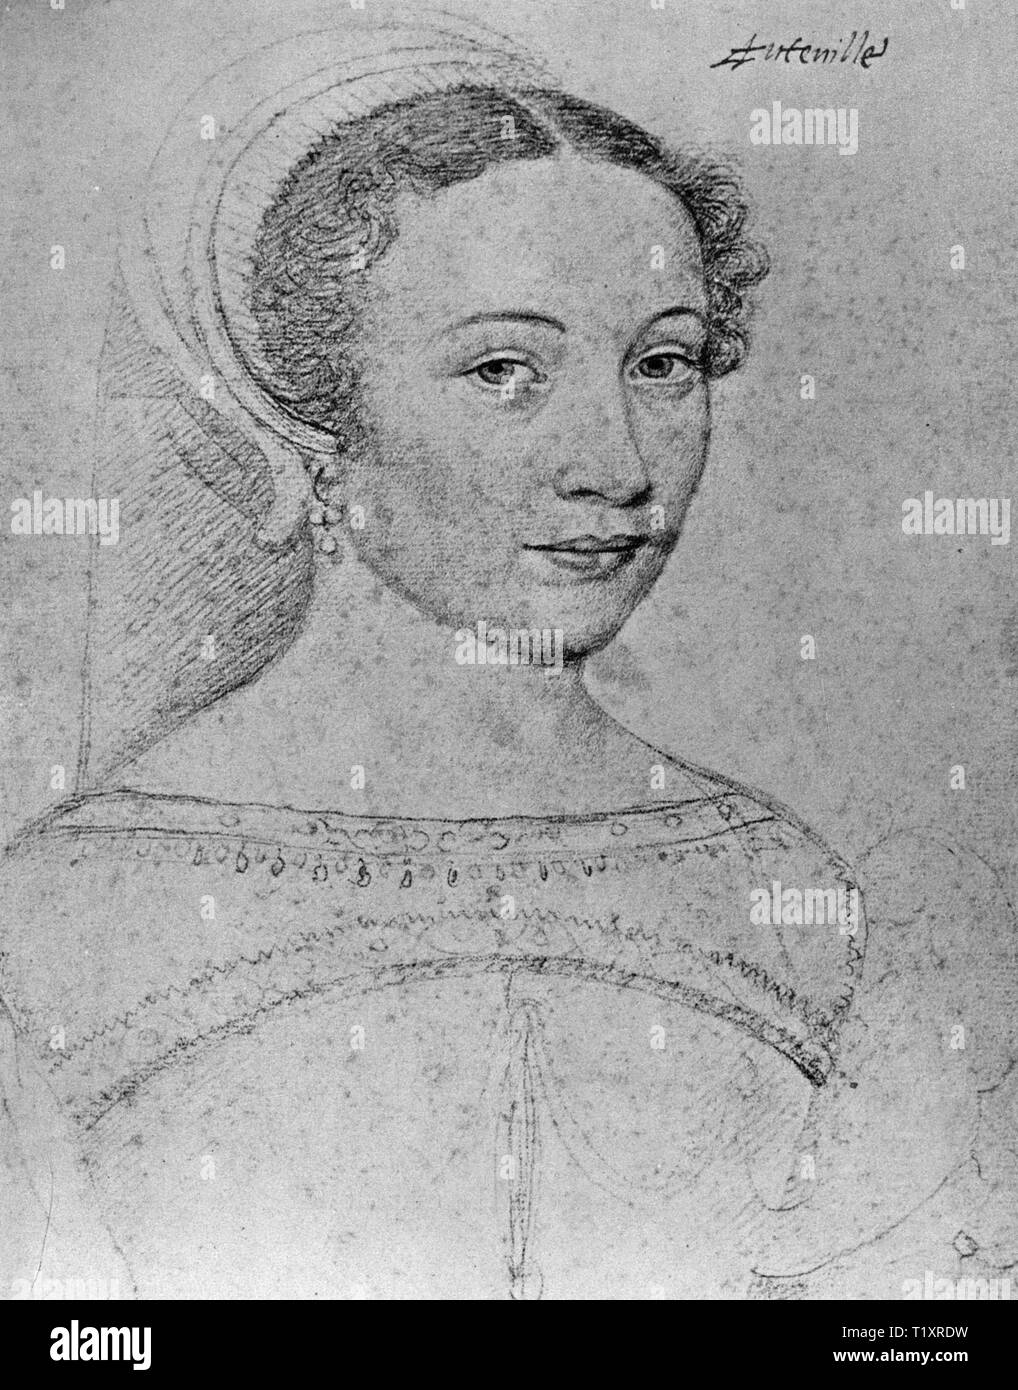 Belle arti, François Clouet (1510 - 1572), disegno Isabeau d'Hauteville, Dame de Chatillon, ritratto, il Musee Conde, Chantilly, Additional-Rights-Clearance-Info-Not-Available Foto Stock